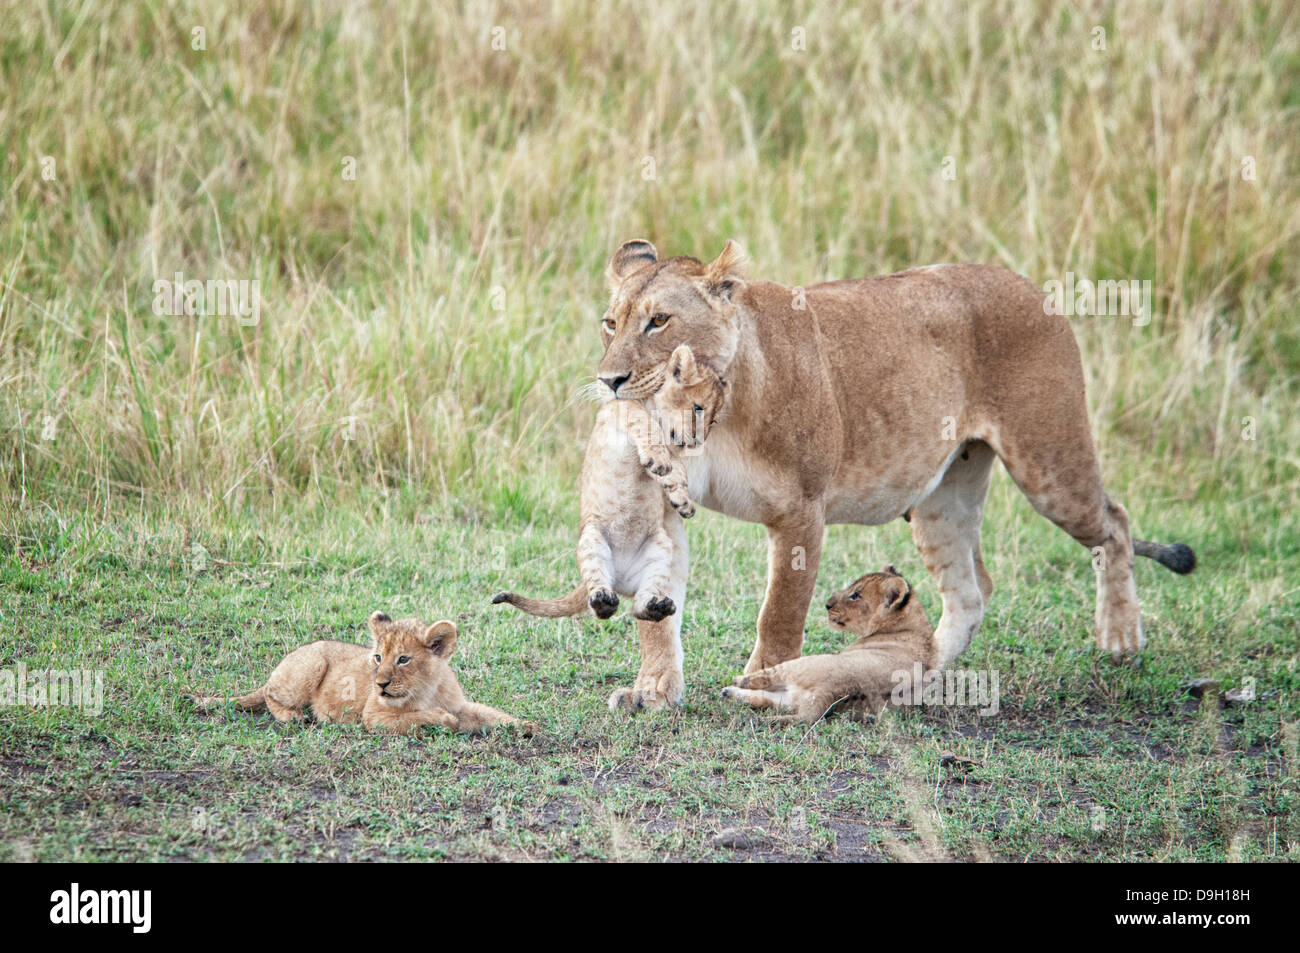 African Lioness carrying a Cub in her mouth with two Cubs beside her,  Panthera leo, Masai Mara National Reserve, Kenya, Africa Stock Photo